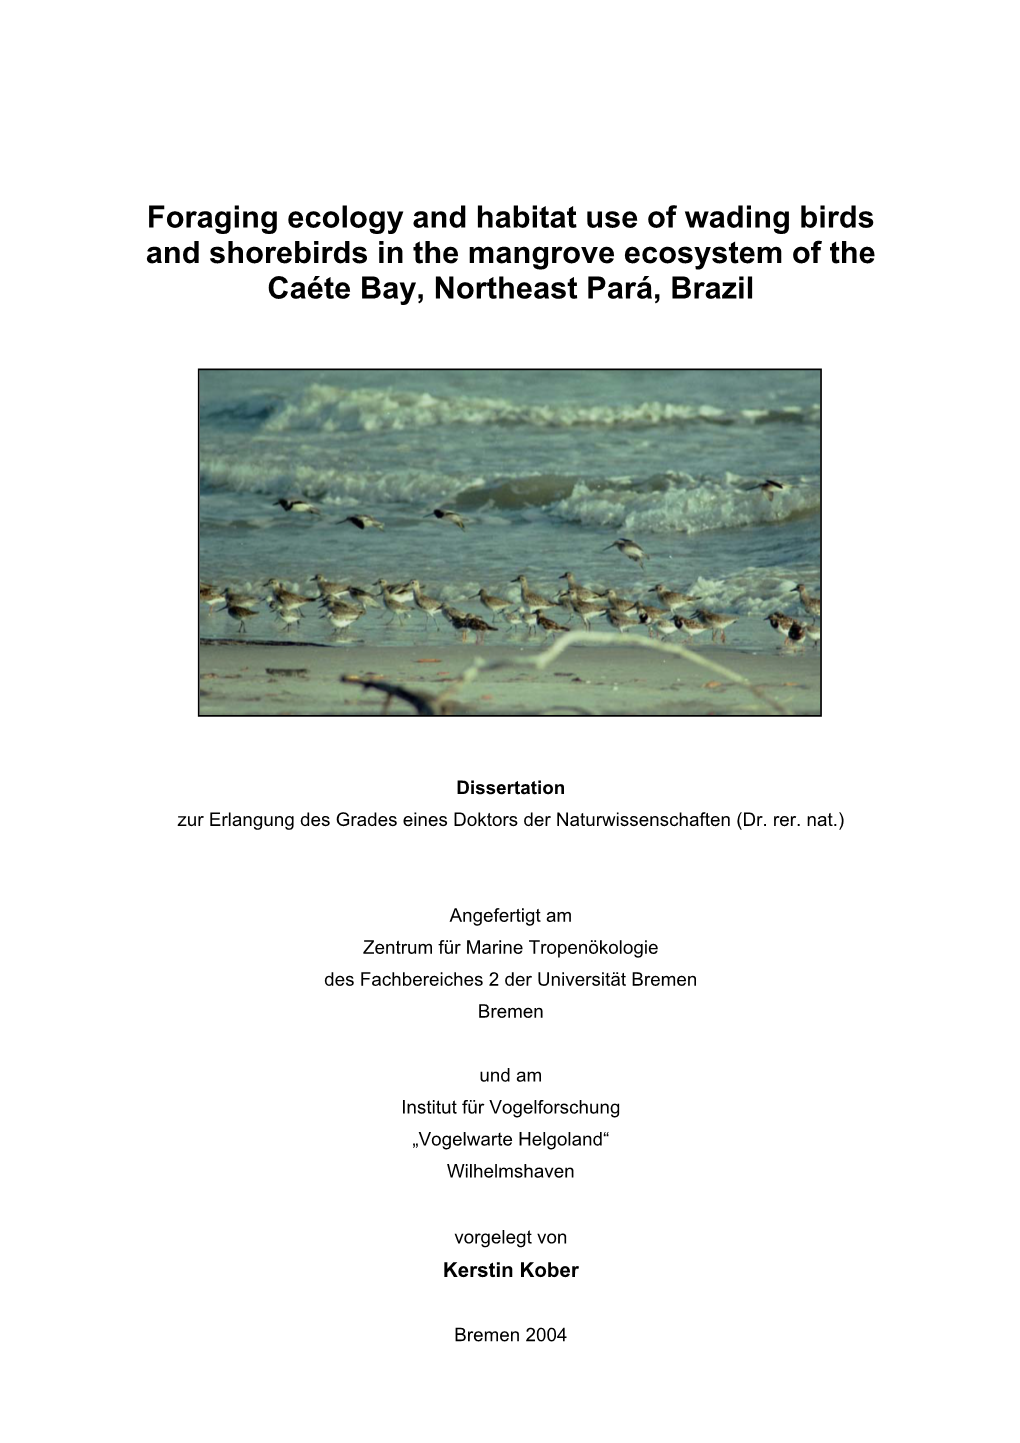 Foraging Ecology and Habitat Use of Wading Birds and Shorebirds in the Mangrove Ecosystem of the Caéte Bay, Northeast Pará, Brazil